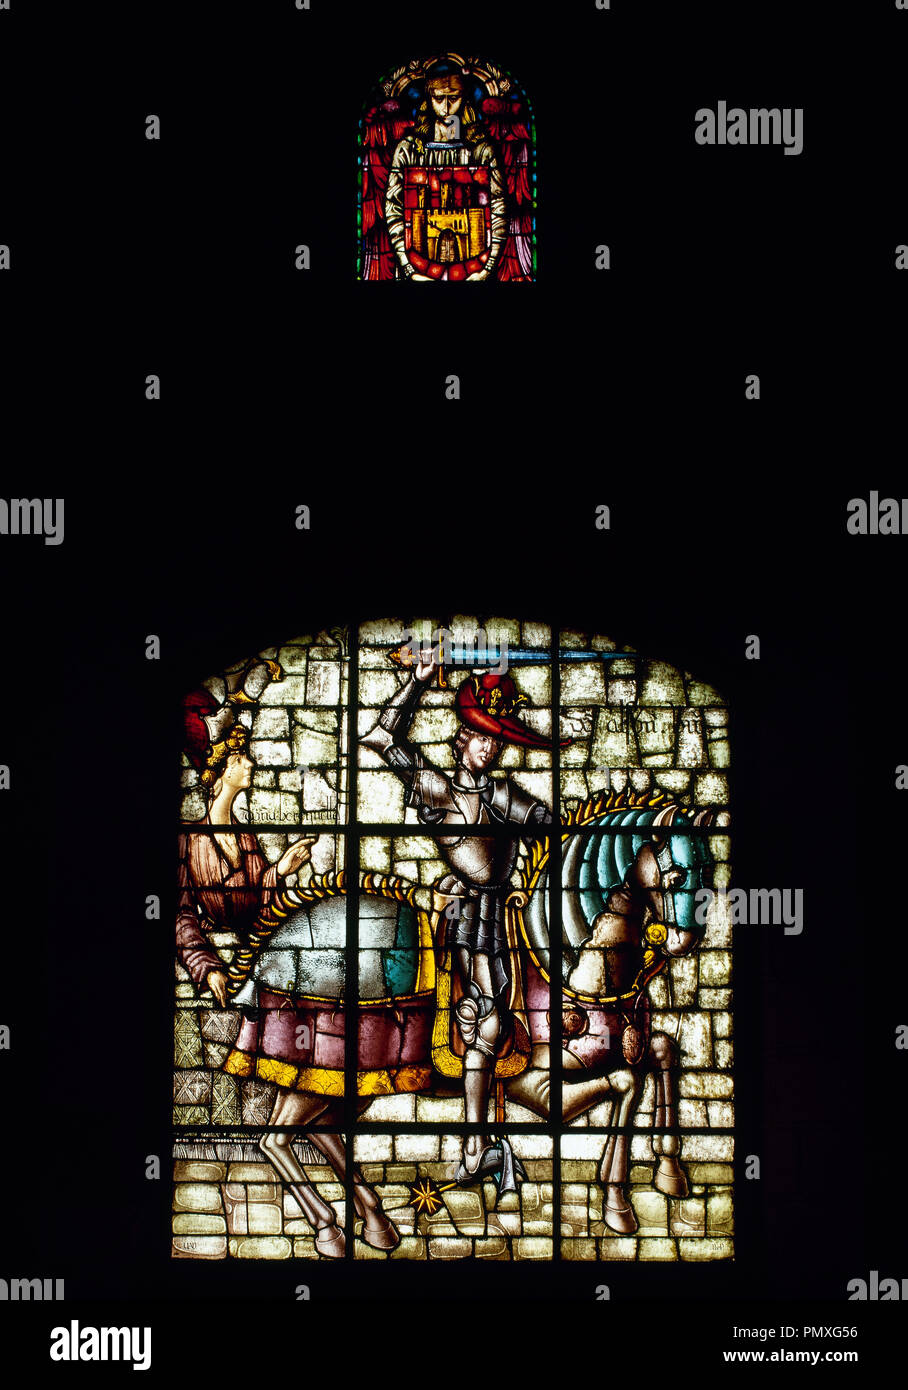 Alfonso VIII of Castile and Toledo (1155-1214) and his daughter Berengaria of Castile (1179-1180). Stained glass. Pineapple room. Alcazar. Segovia. Castile and Leon. Spain. Stock Photo